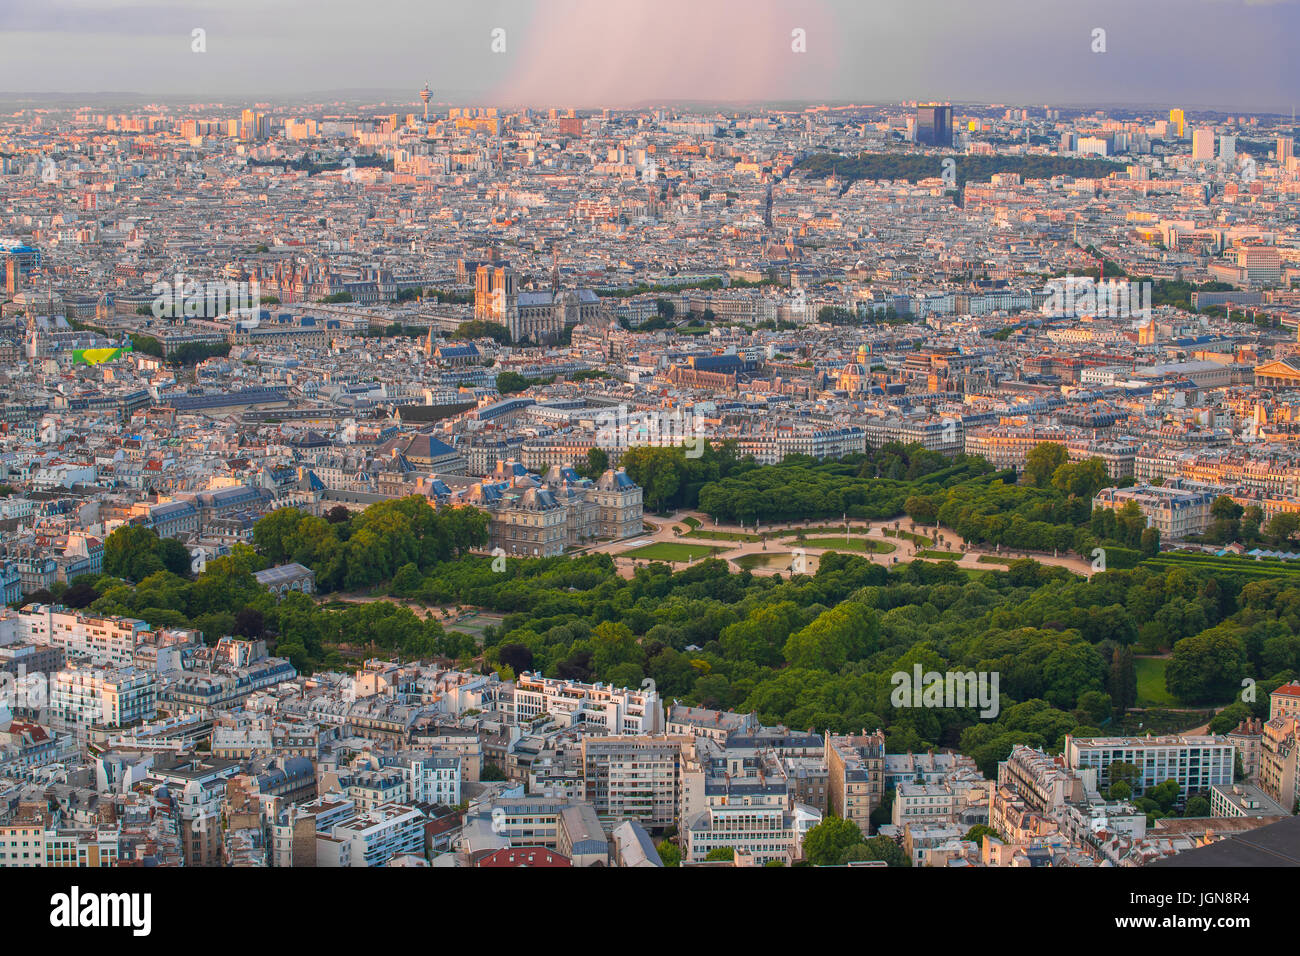 Paris city at sunset in France. Stock Photo